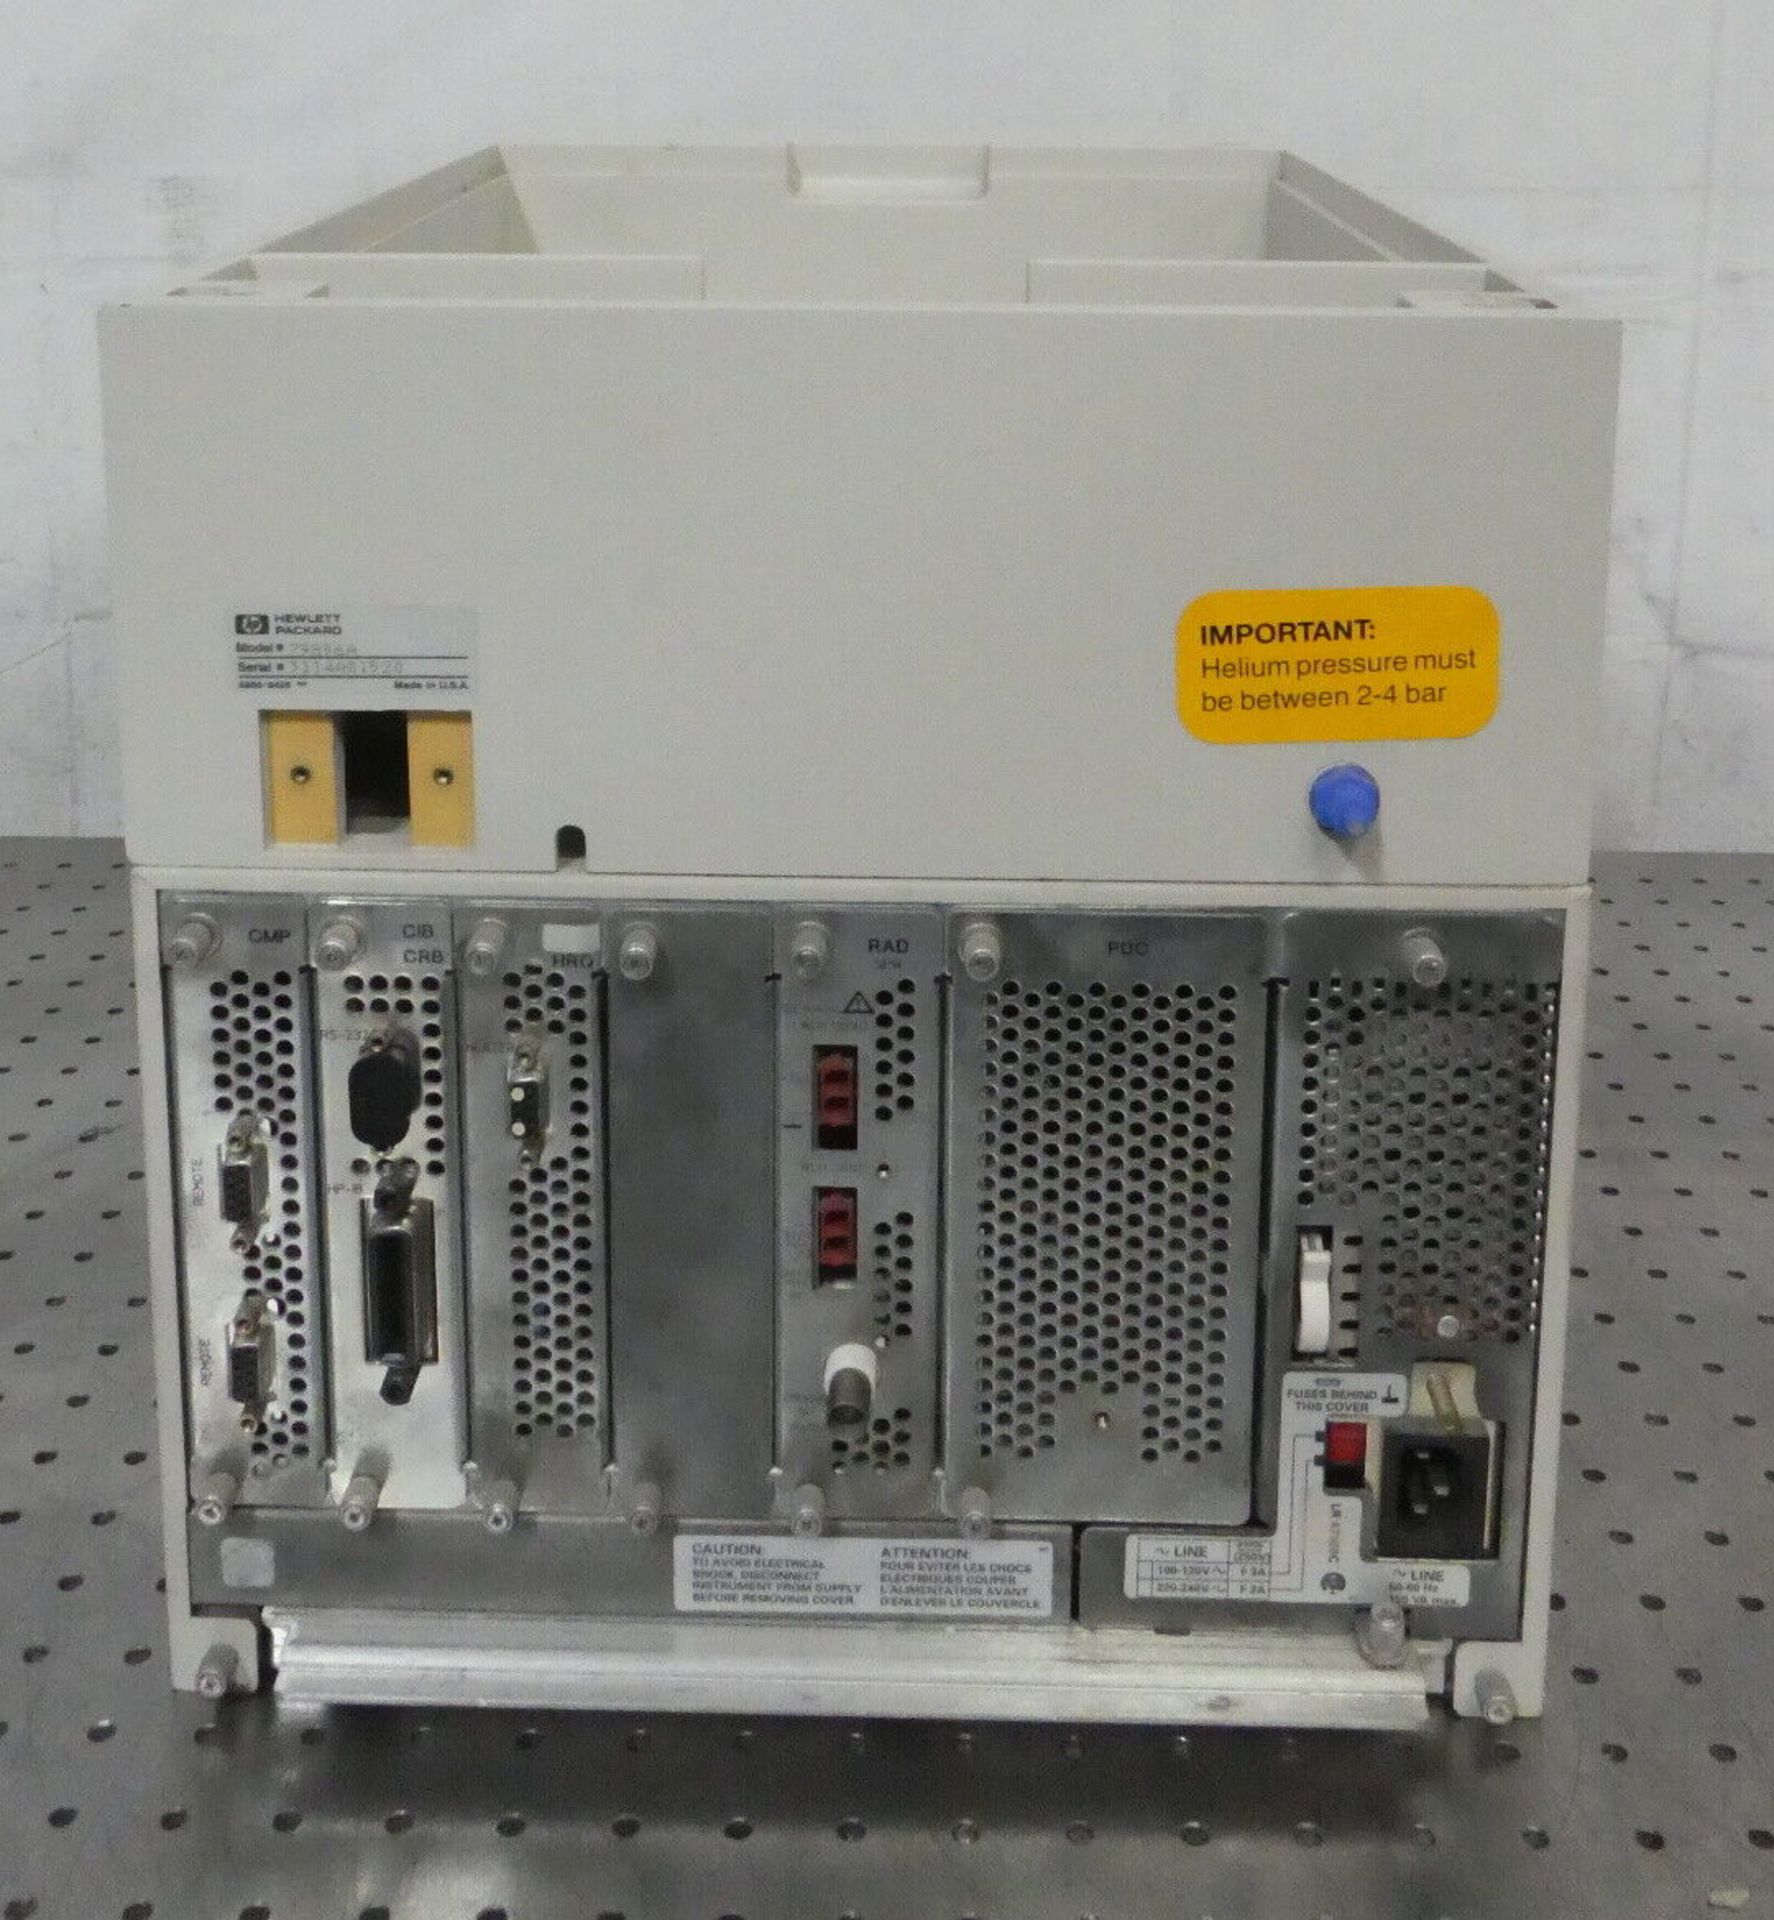 HP 1050 Series 79856A Chromatography HPLC Pump - Image 8 of 10